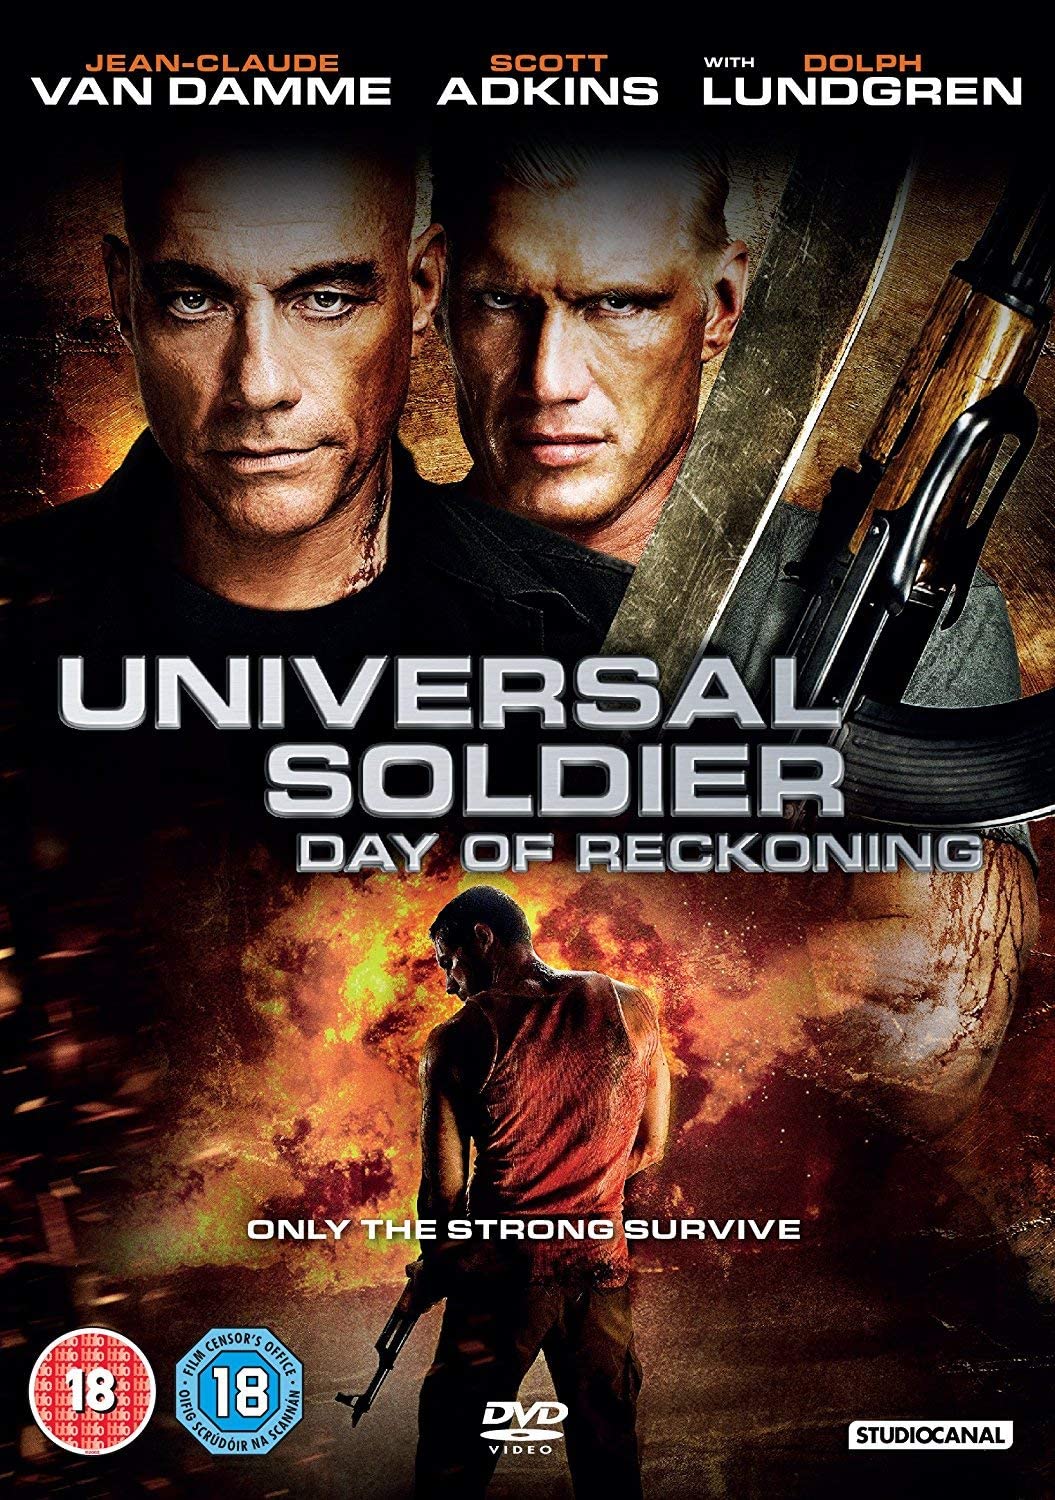 Universal Soldier Day Of Reckoning - Action/Sci-fi [DVD]